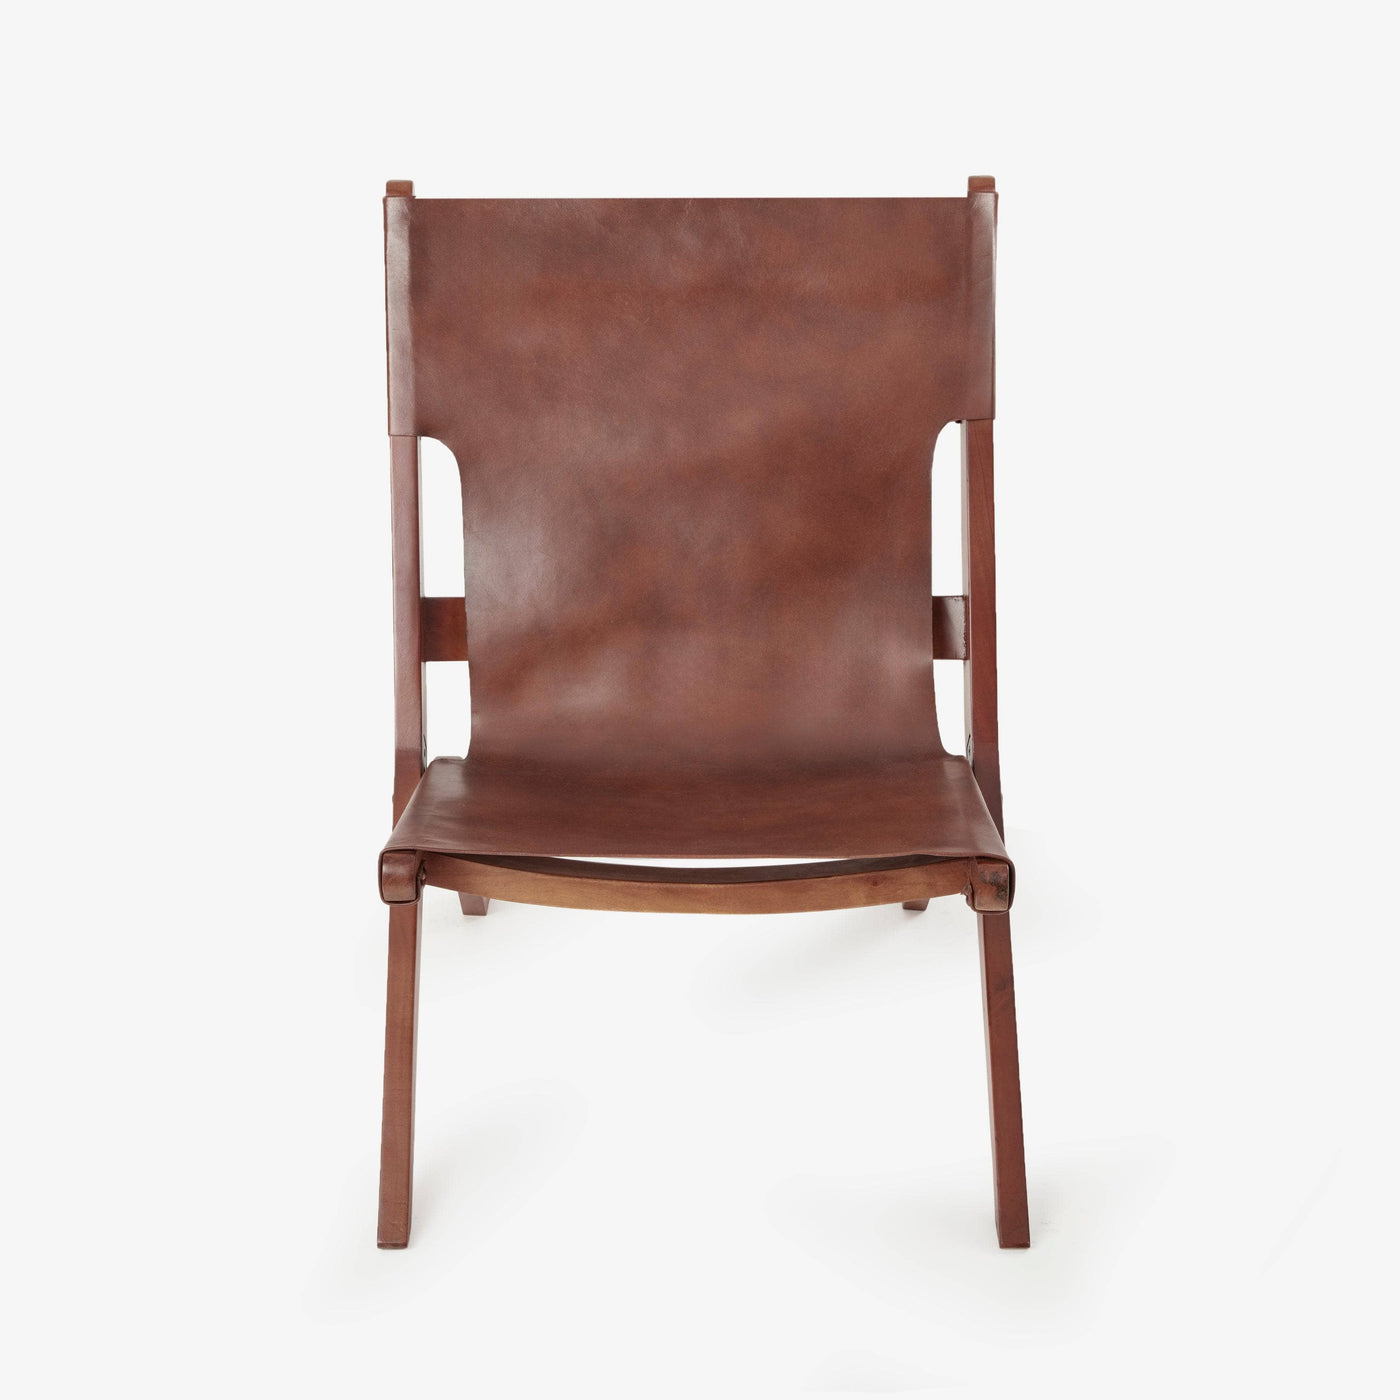 Arusha Leather Accent Chair, Tan Armchairs sazy.com